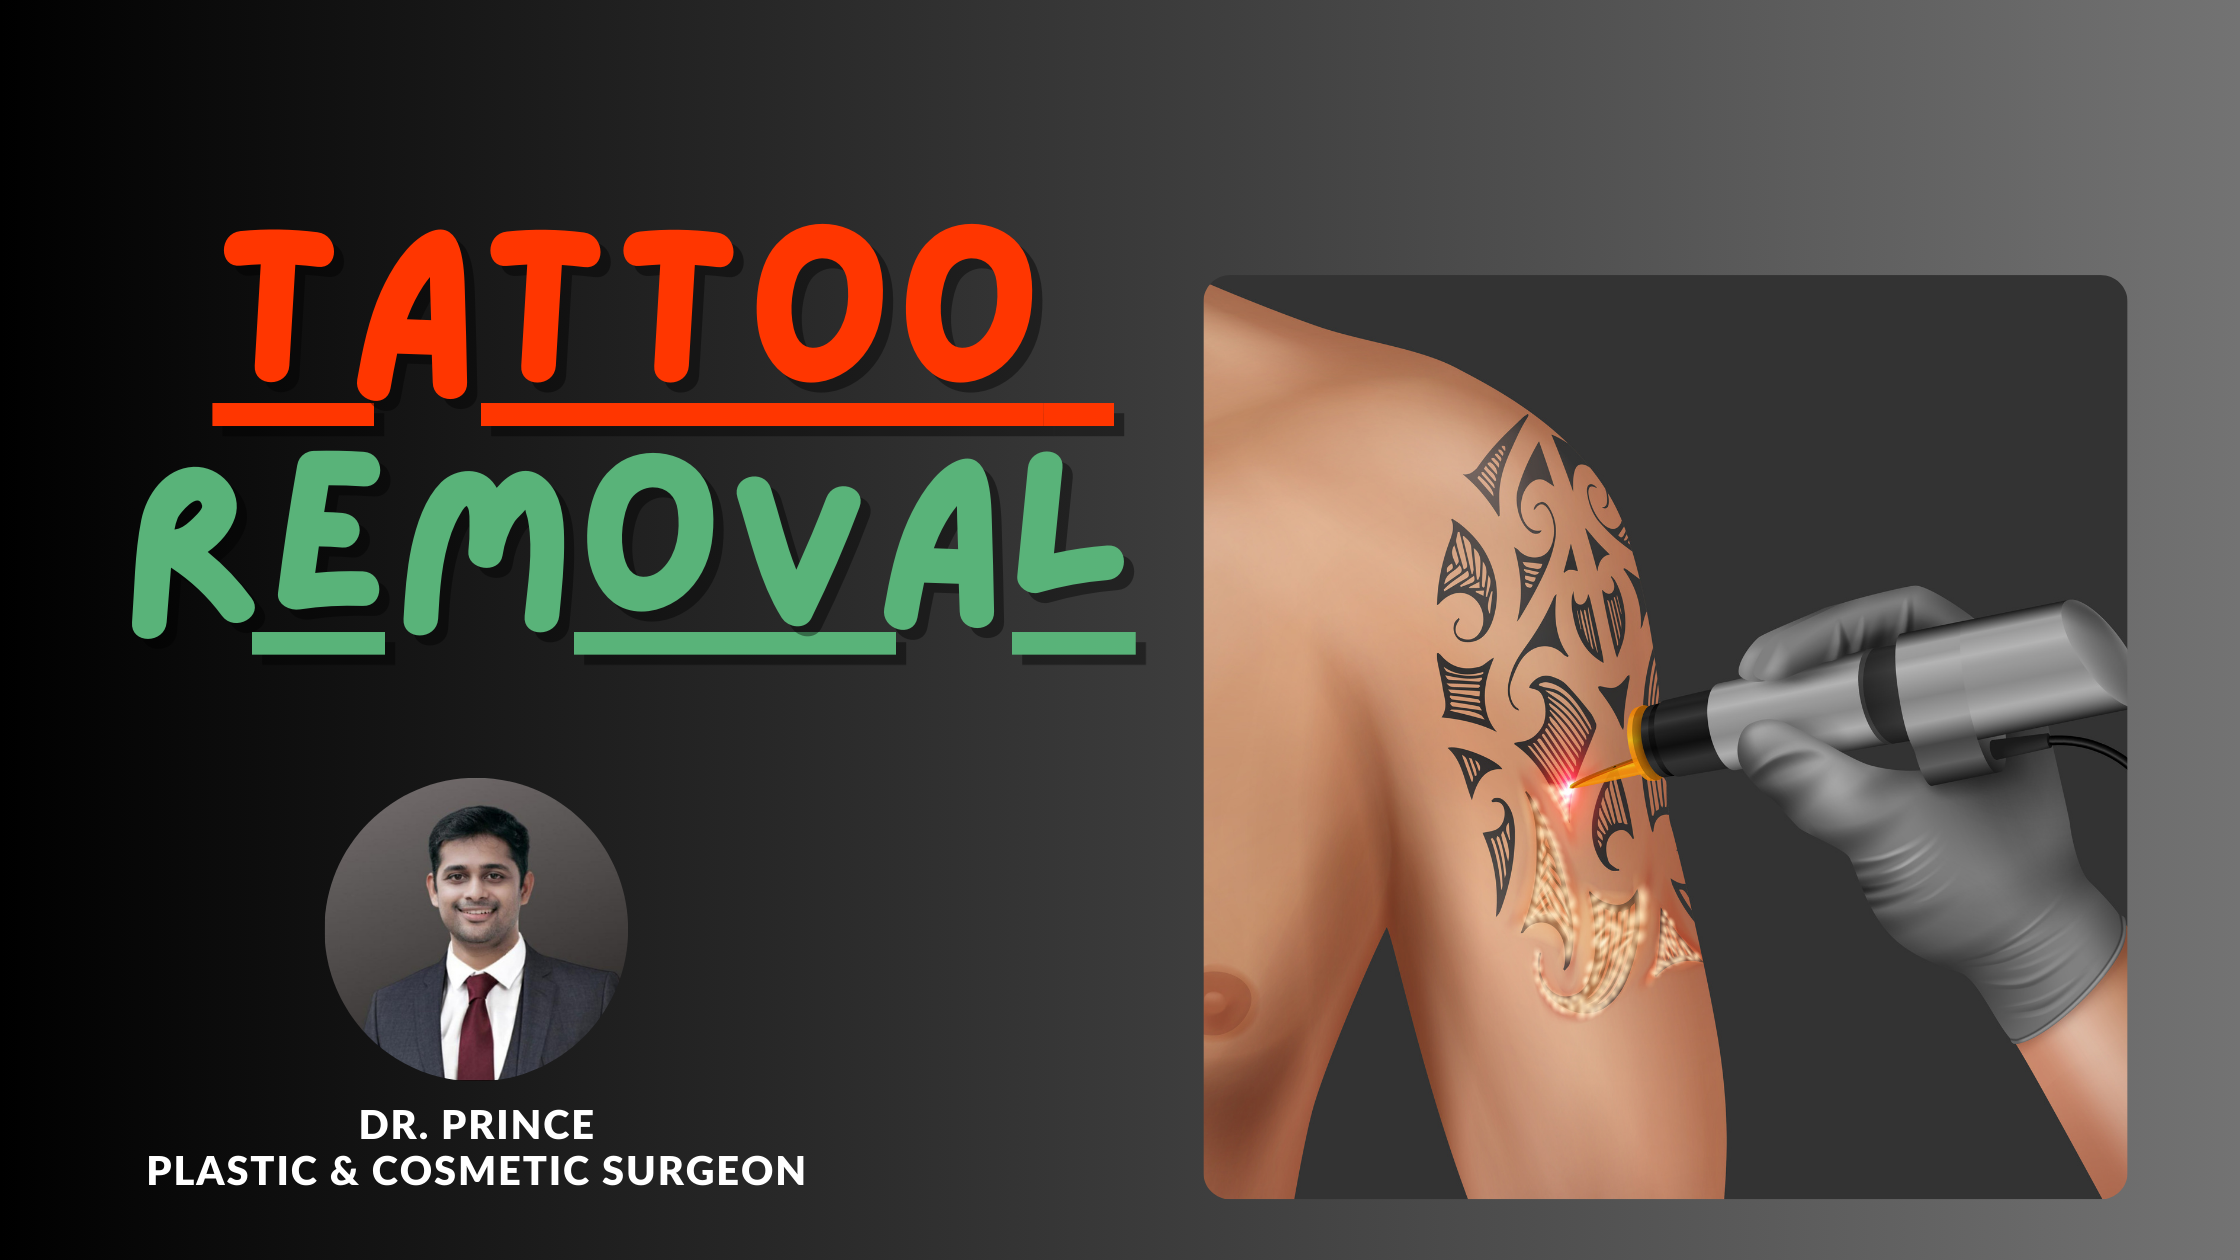 Dr. Prince performs tattoo removal, skillfully erasing ink and restoring the skin's natural canvas with precision.